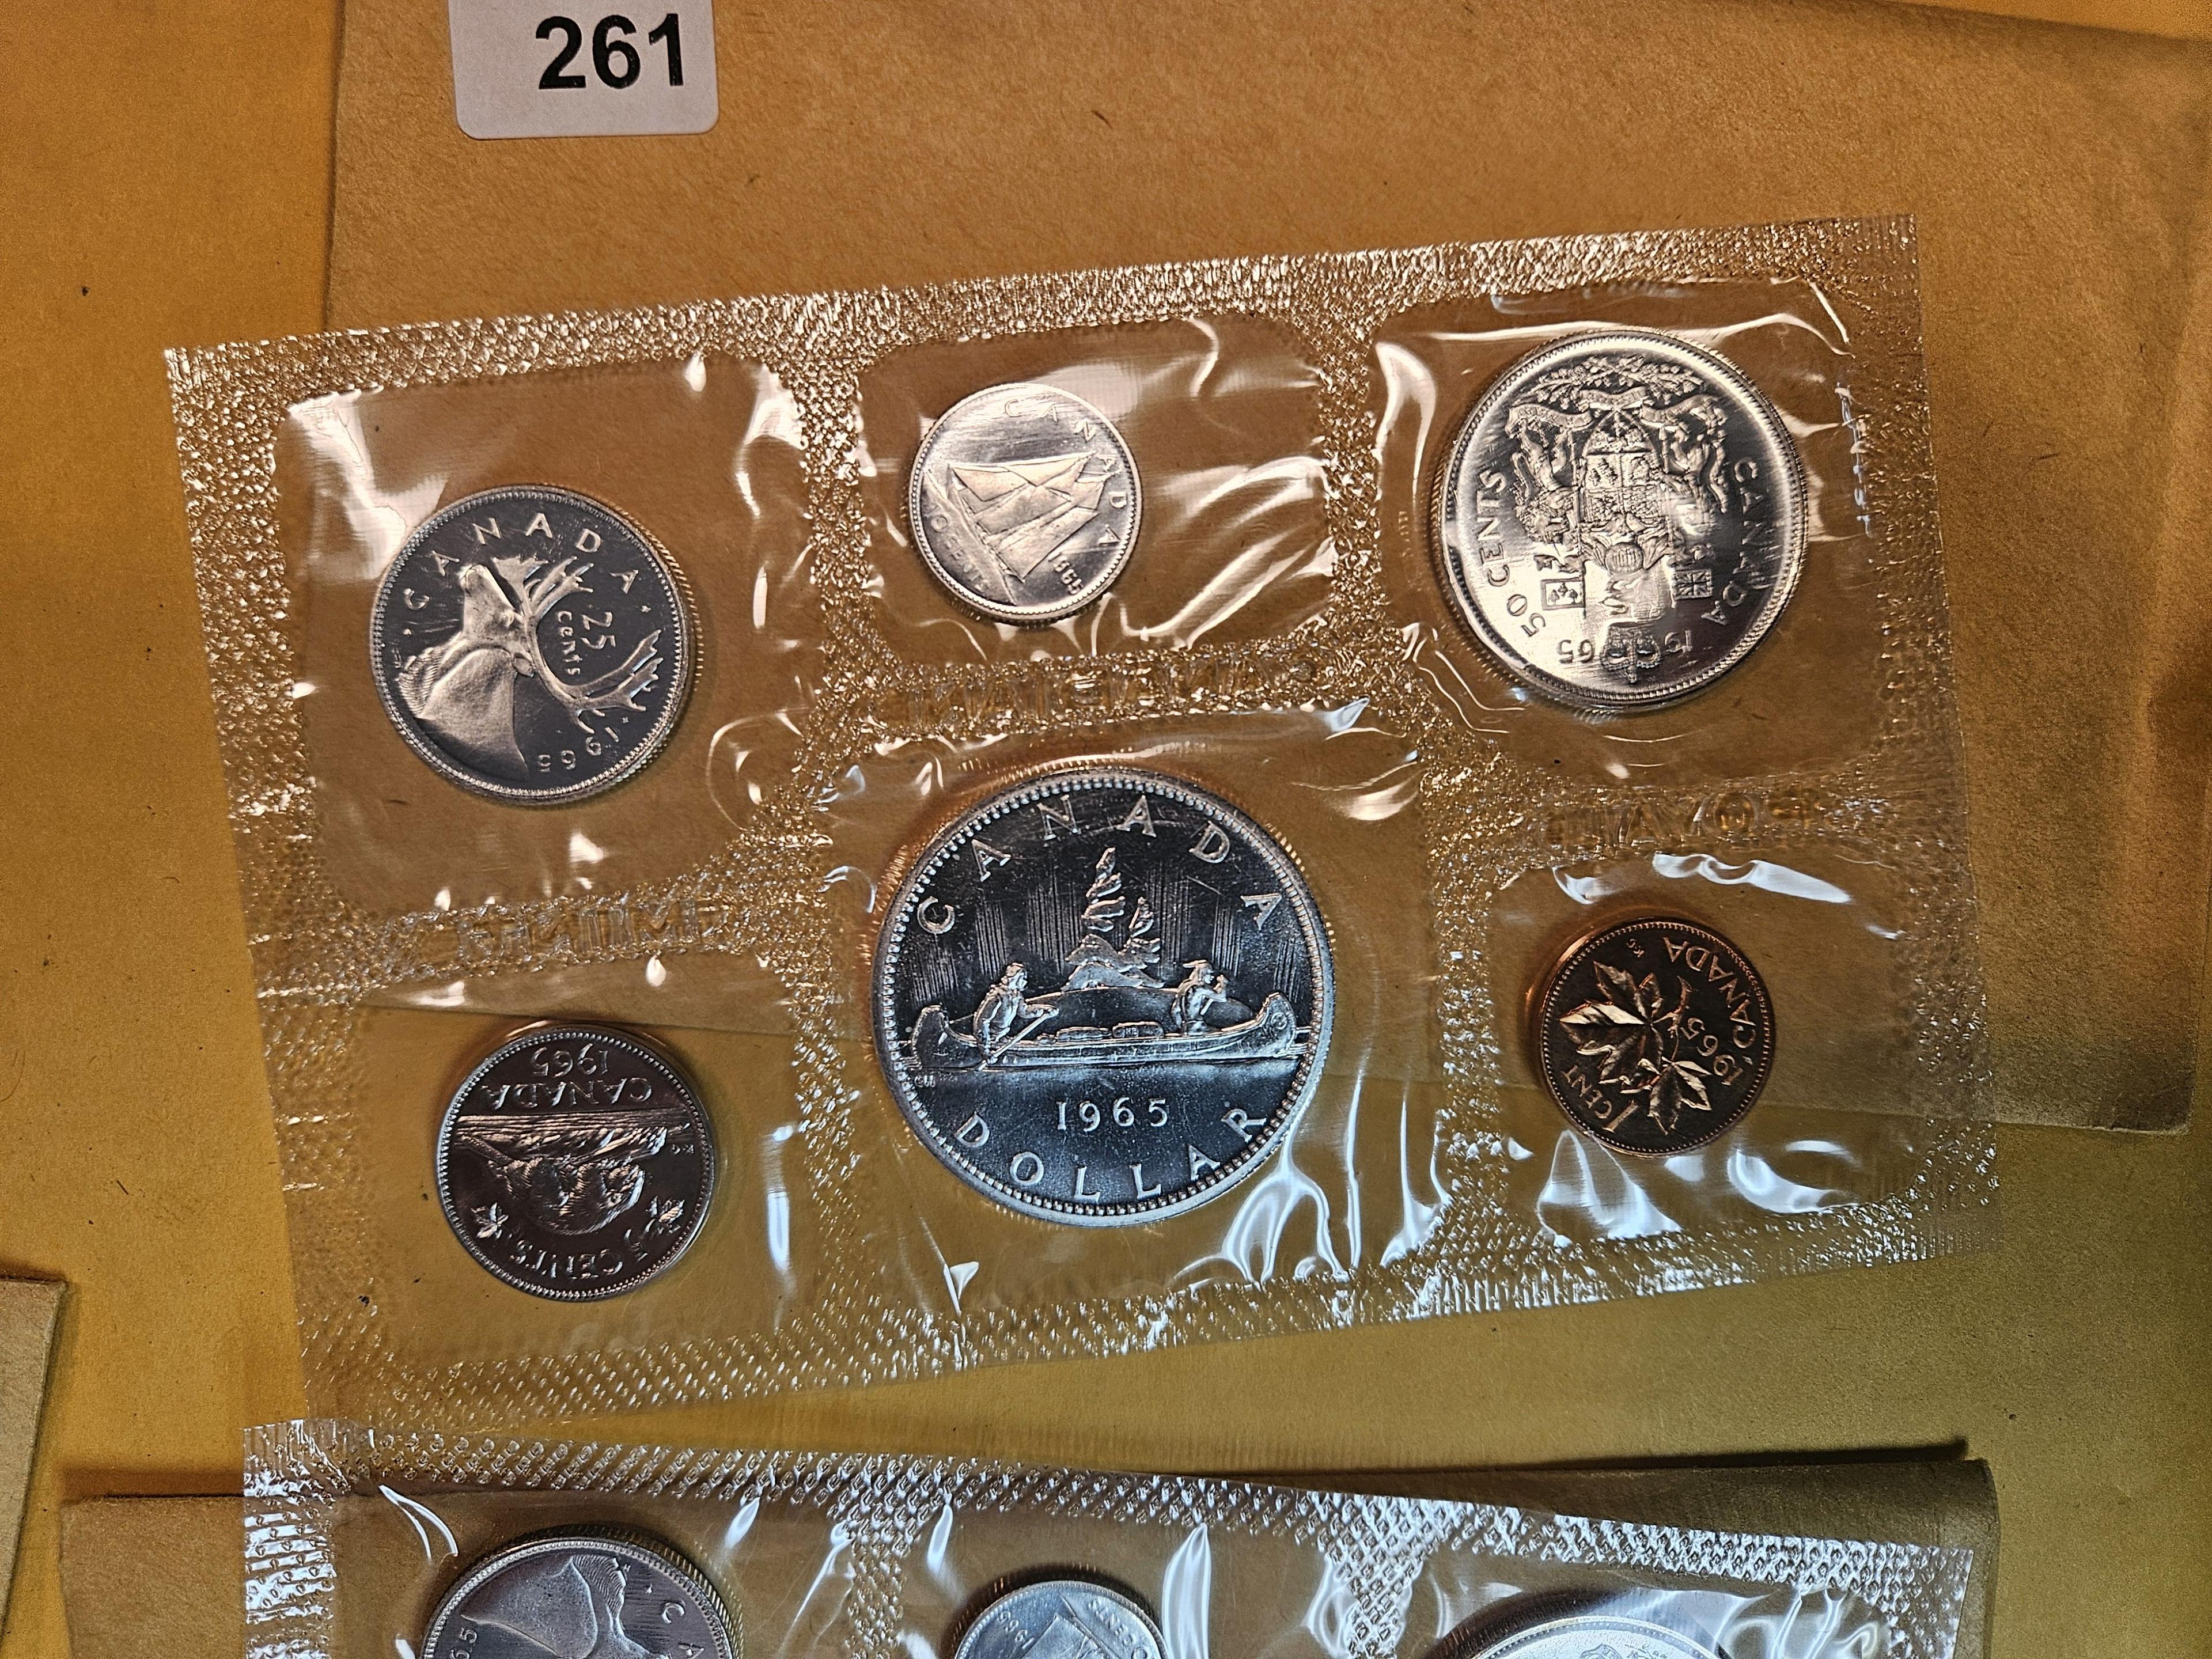 Four Canadian Silver Prooflike Sets